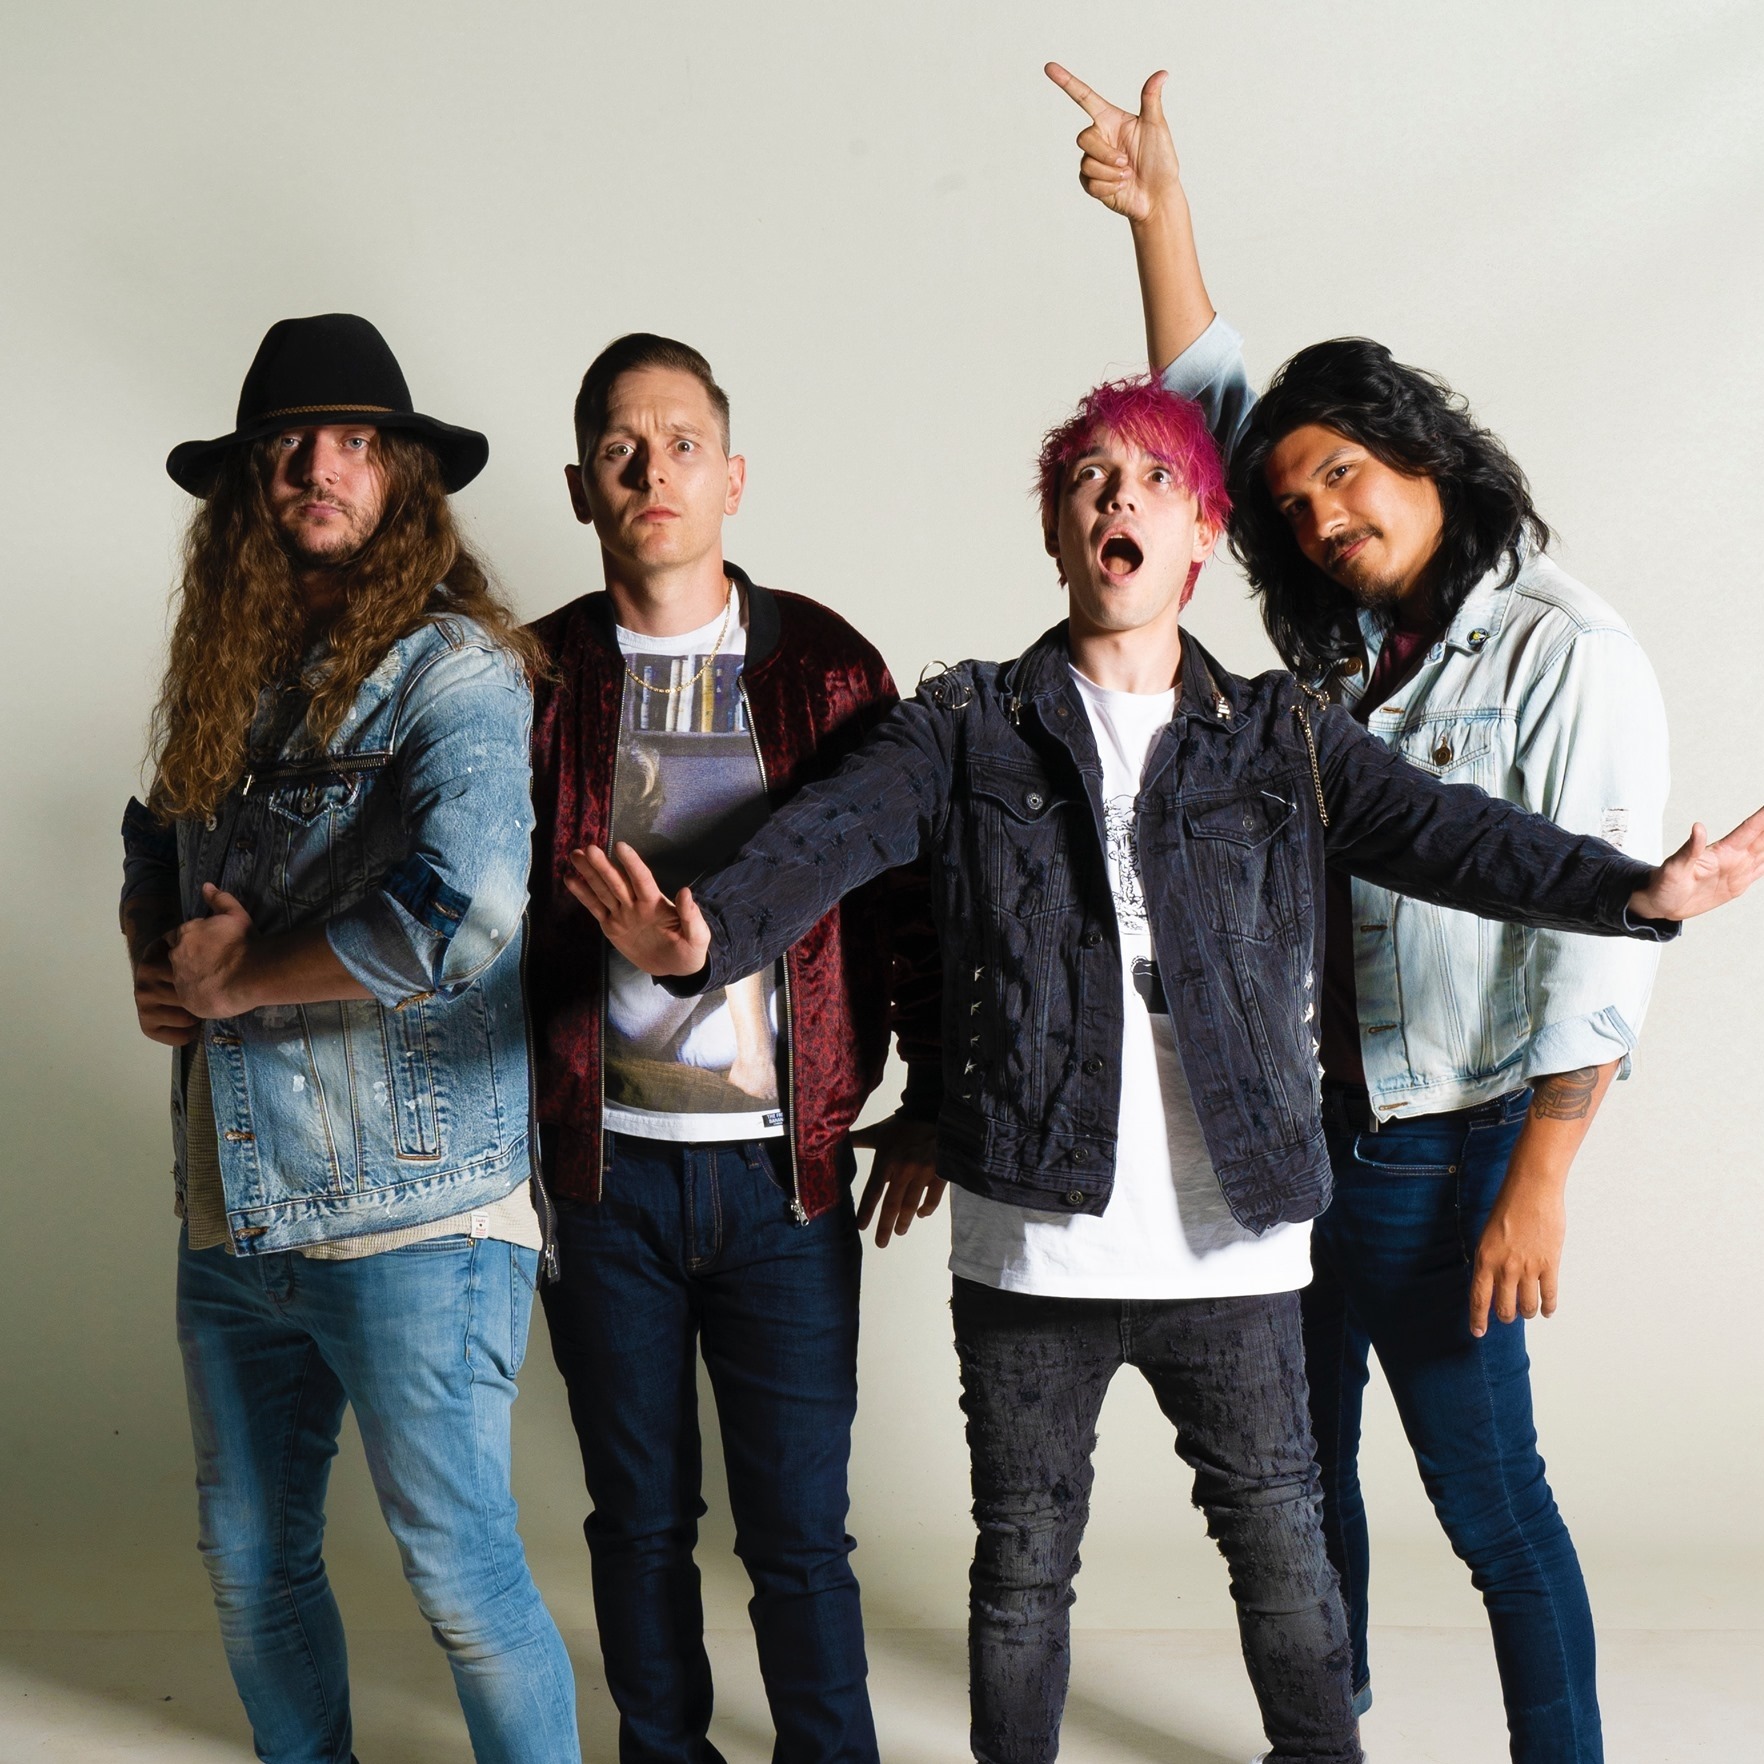 WATCH: Rock band Badflower sing of the woes of being “30” in new single